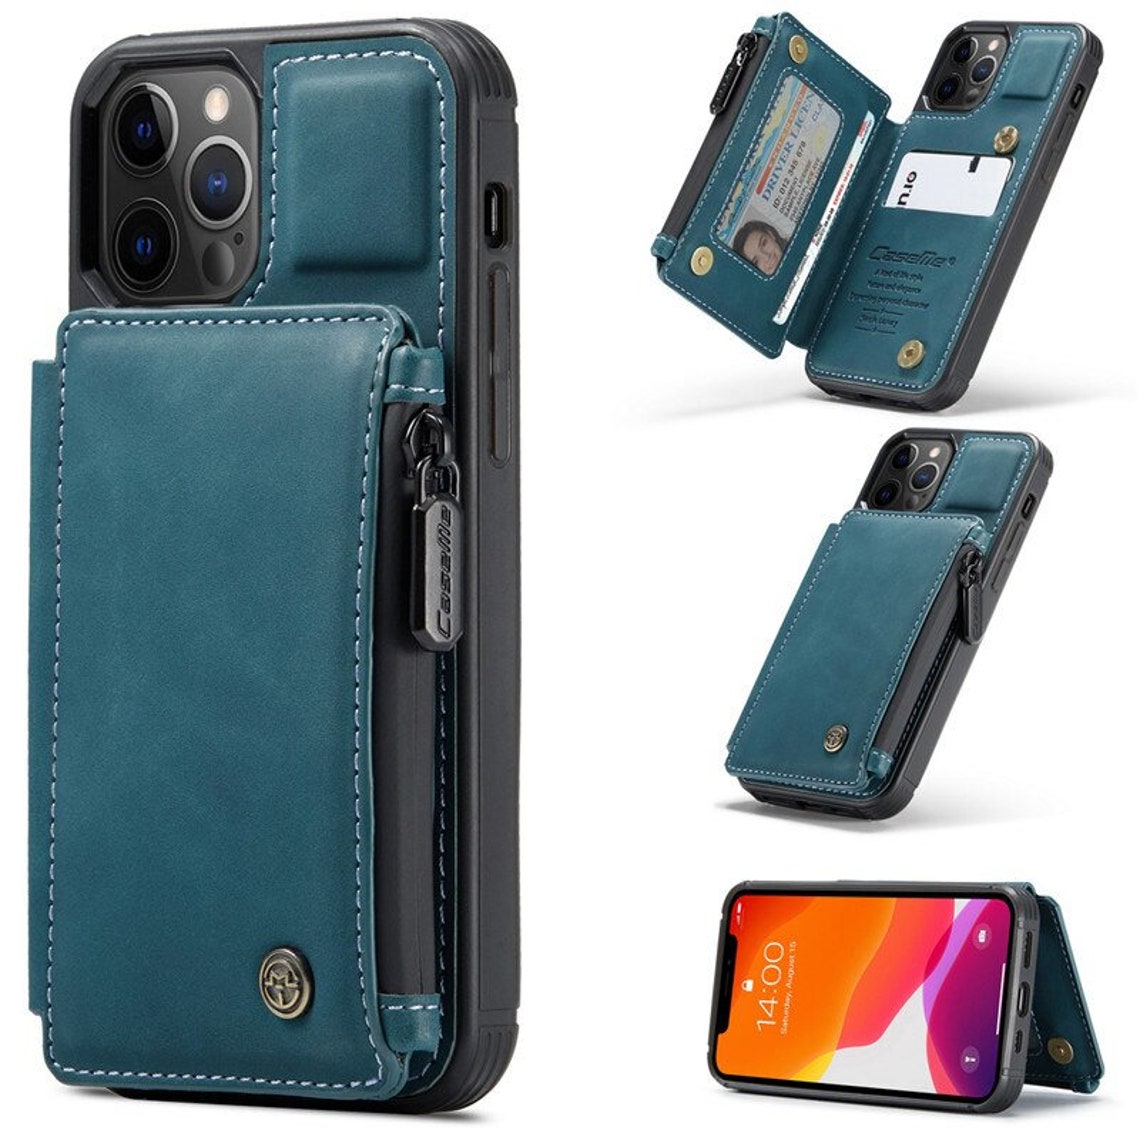 Flip Leather Case For Iphone 13 12 11 Pro Xs Max Xr X 7 8 Plus Etsy